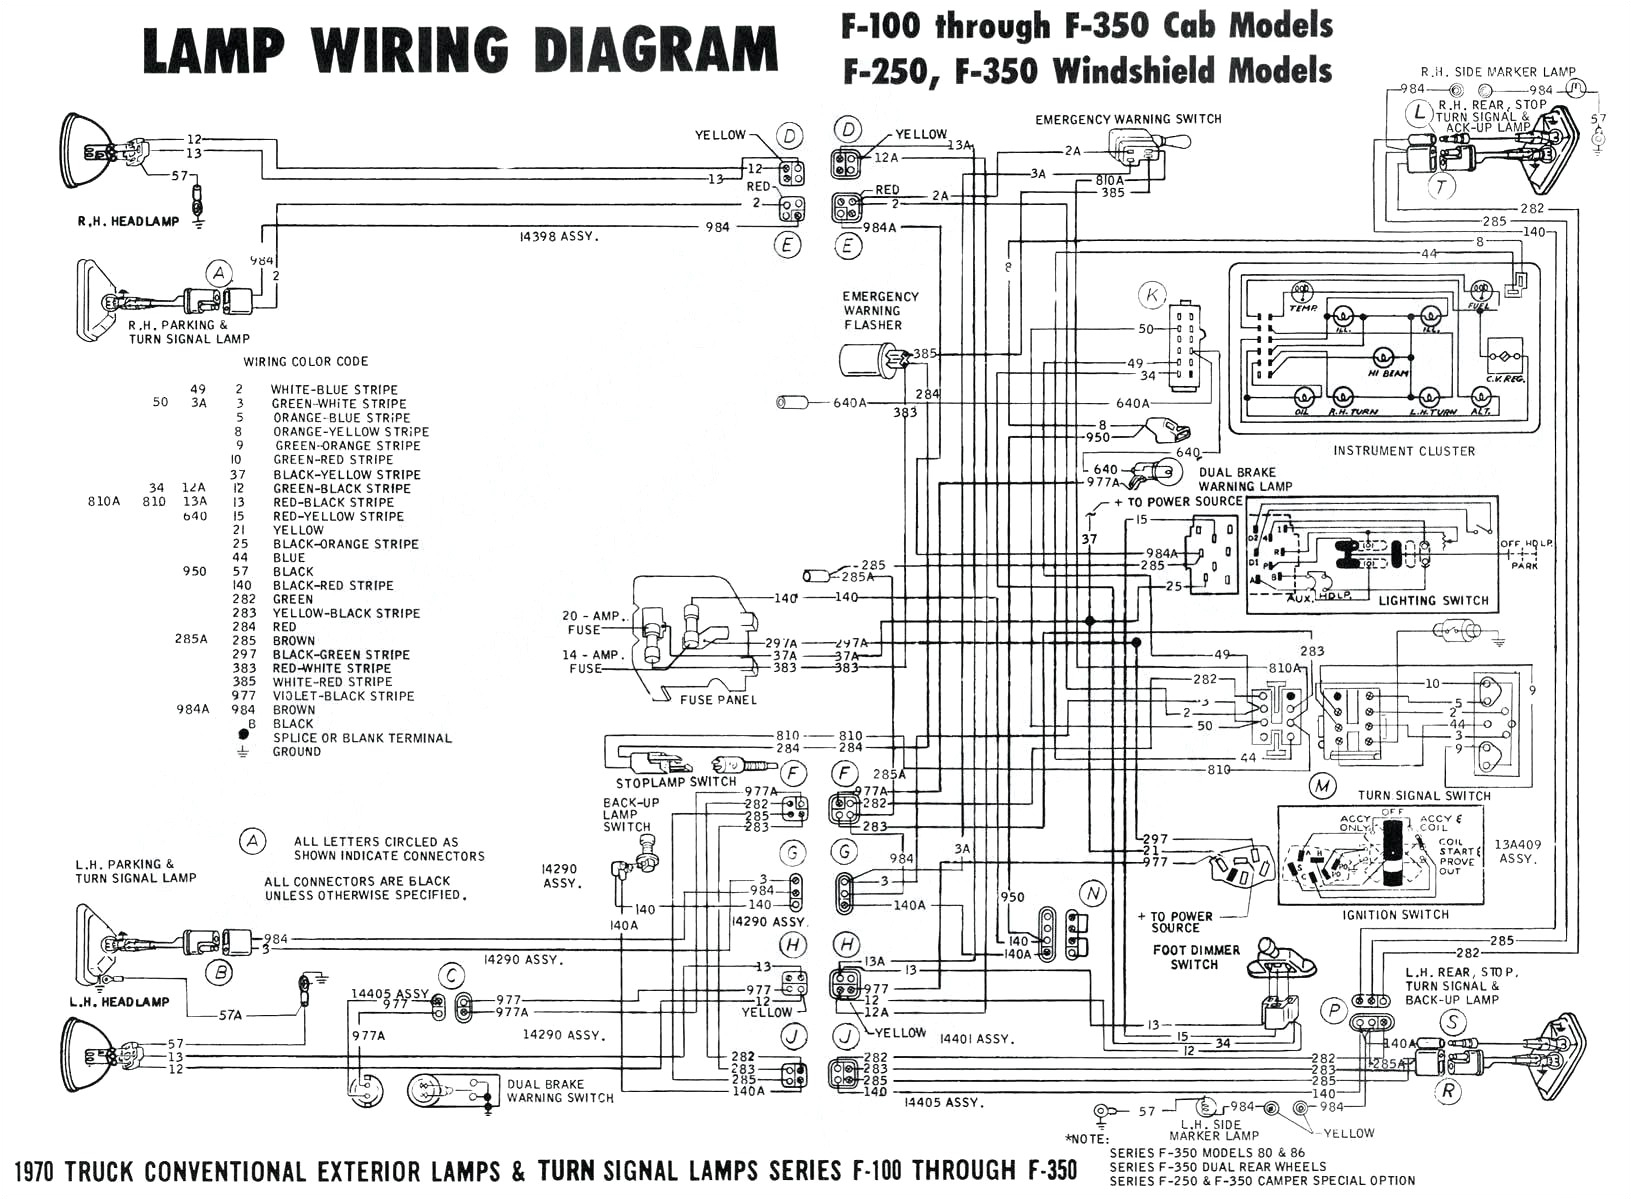 1987 f150 wiring diagram experts of wiring diagram u2022 rh evilcloud co uk 1987 ford f250